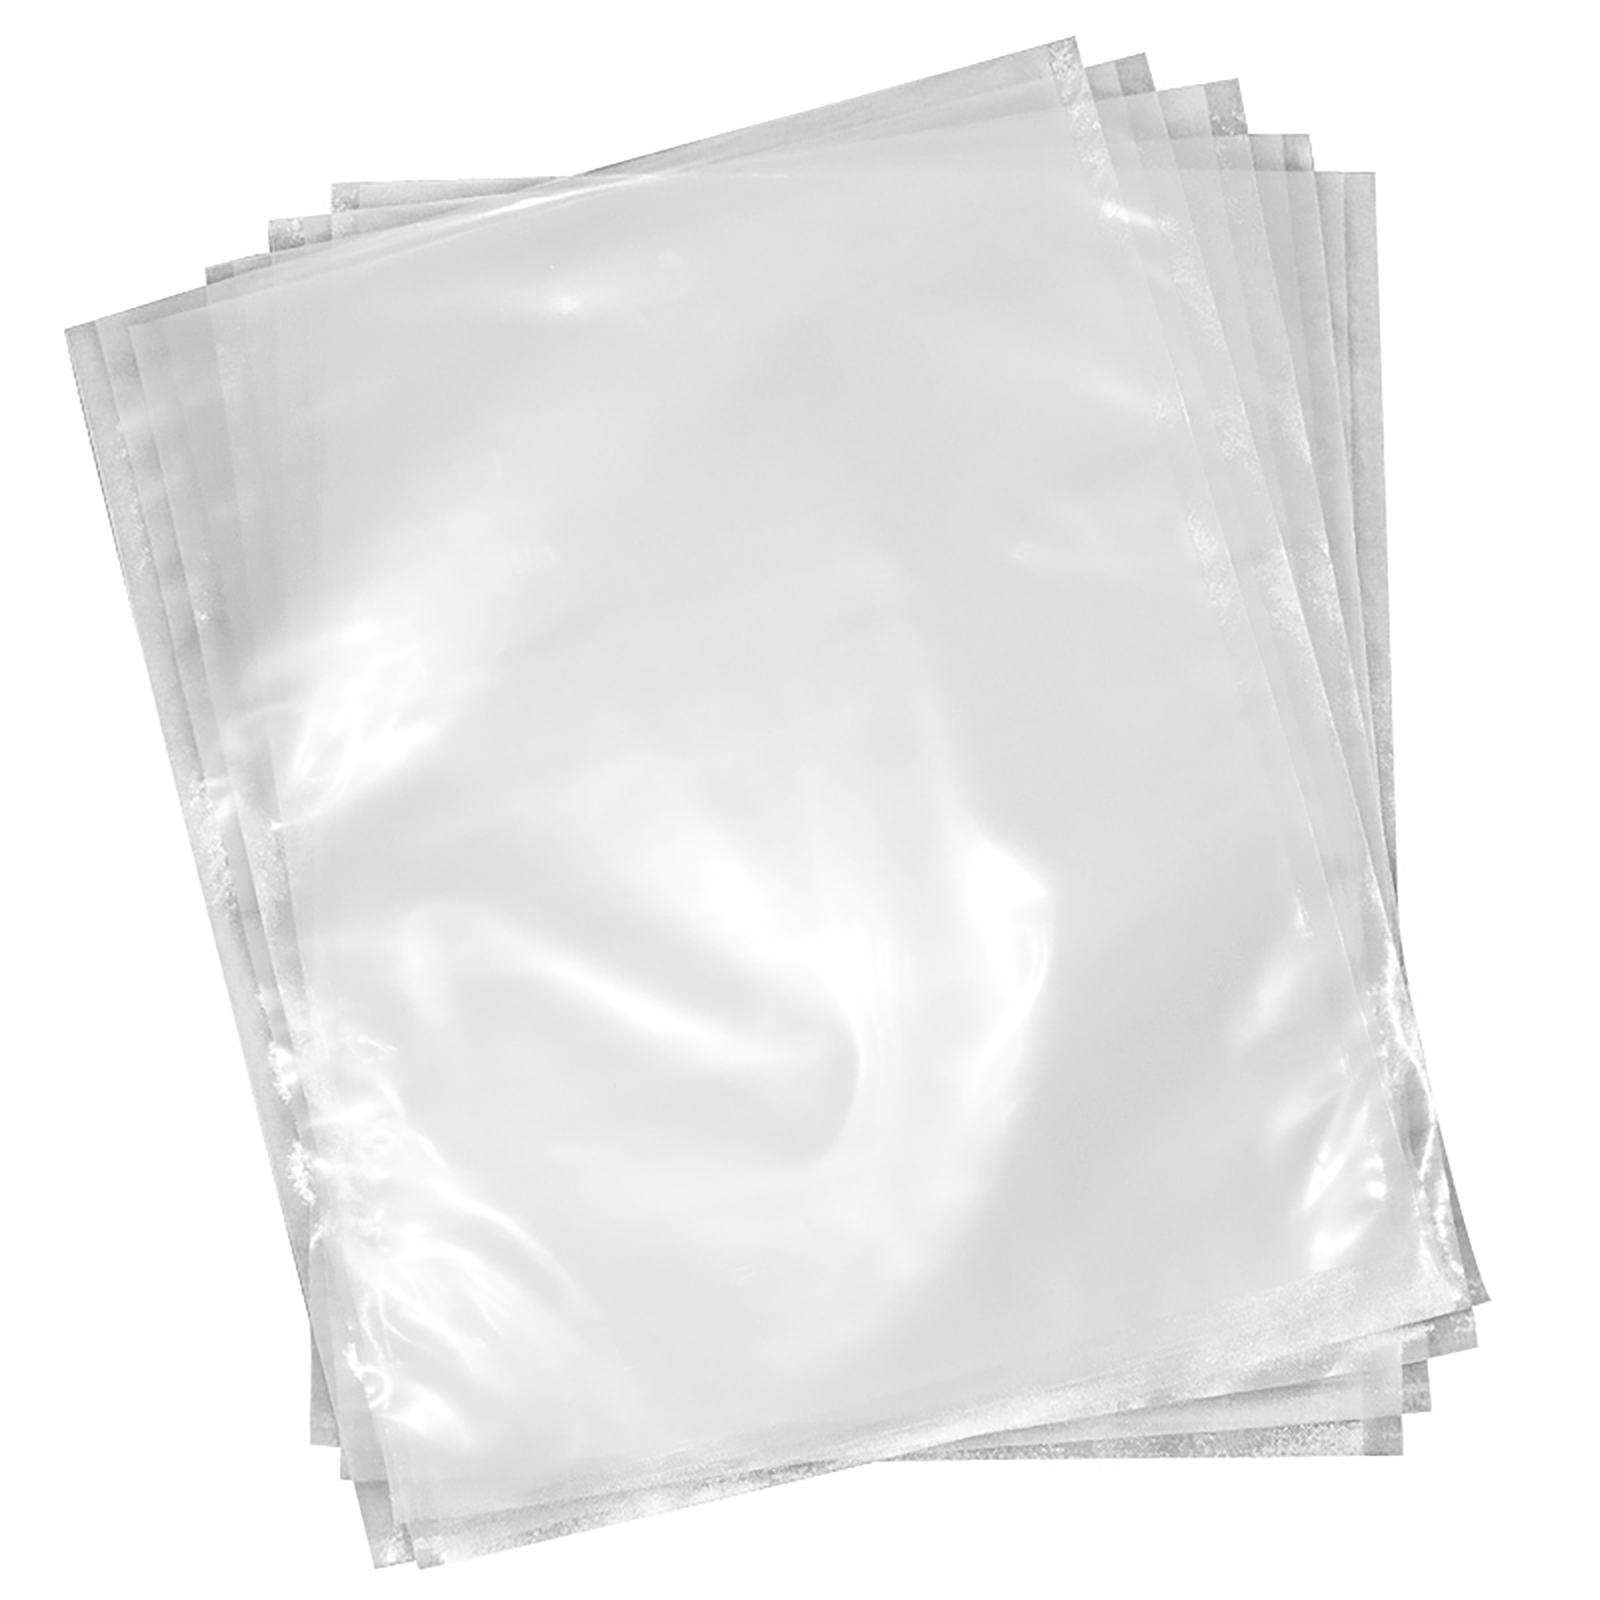 A bundle of the clear HAL vacuum sealing bags with a pack of 500 units over white background